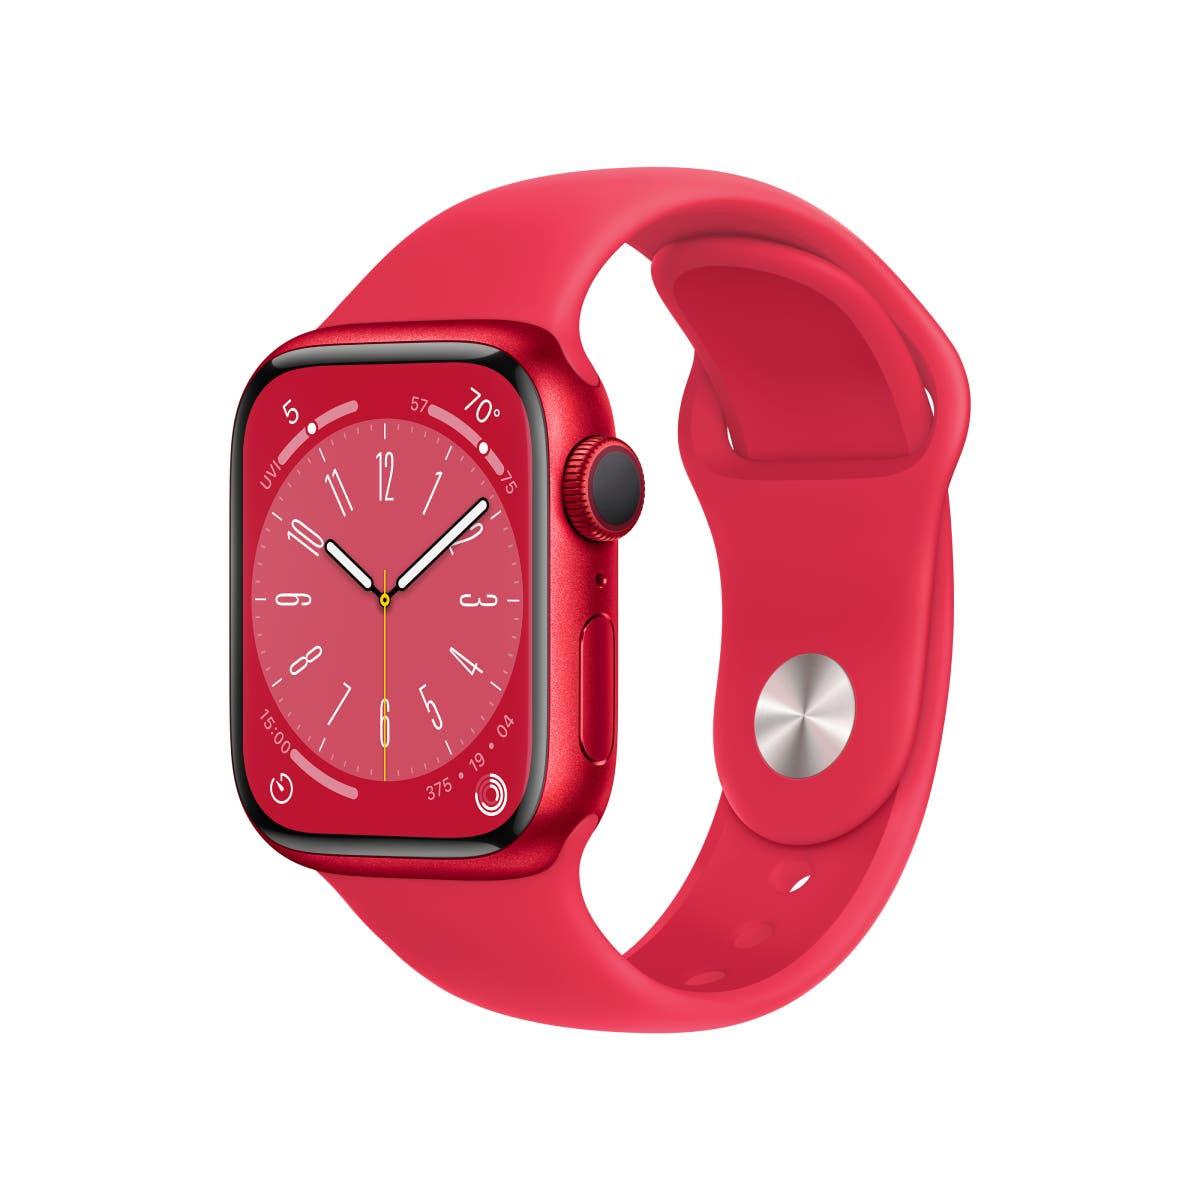 Apple Watch Series 8 Aluminum Case with Sport Band - Apple Watch Series 8 Aluminum Case with Sport Band - undefined Ennap.com